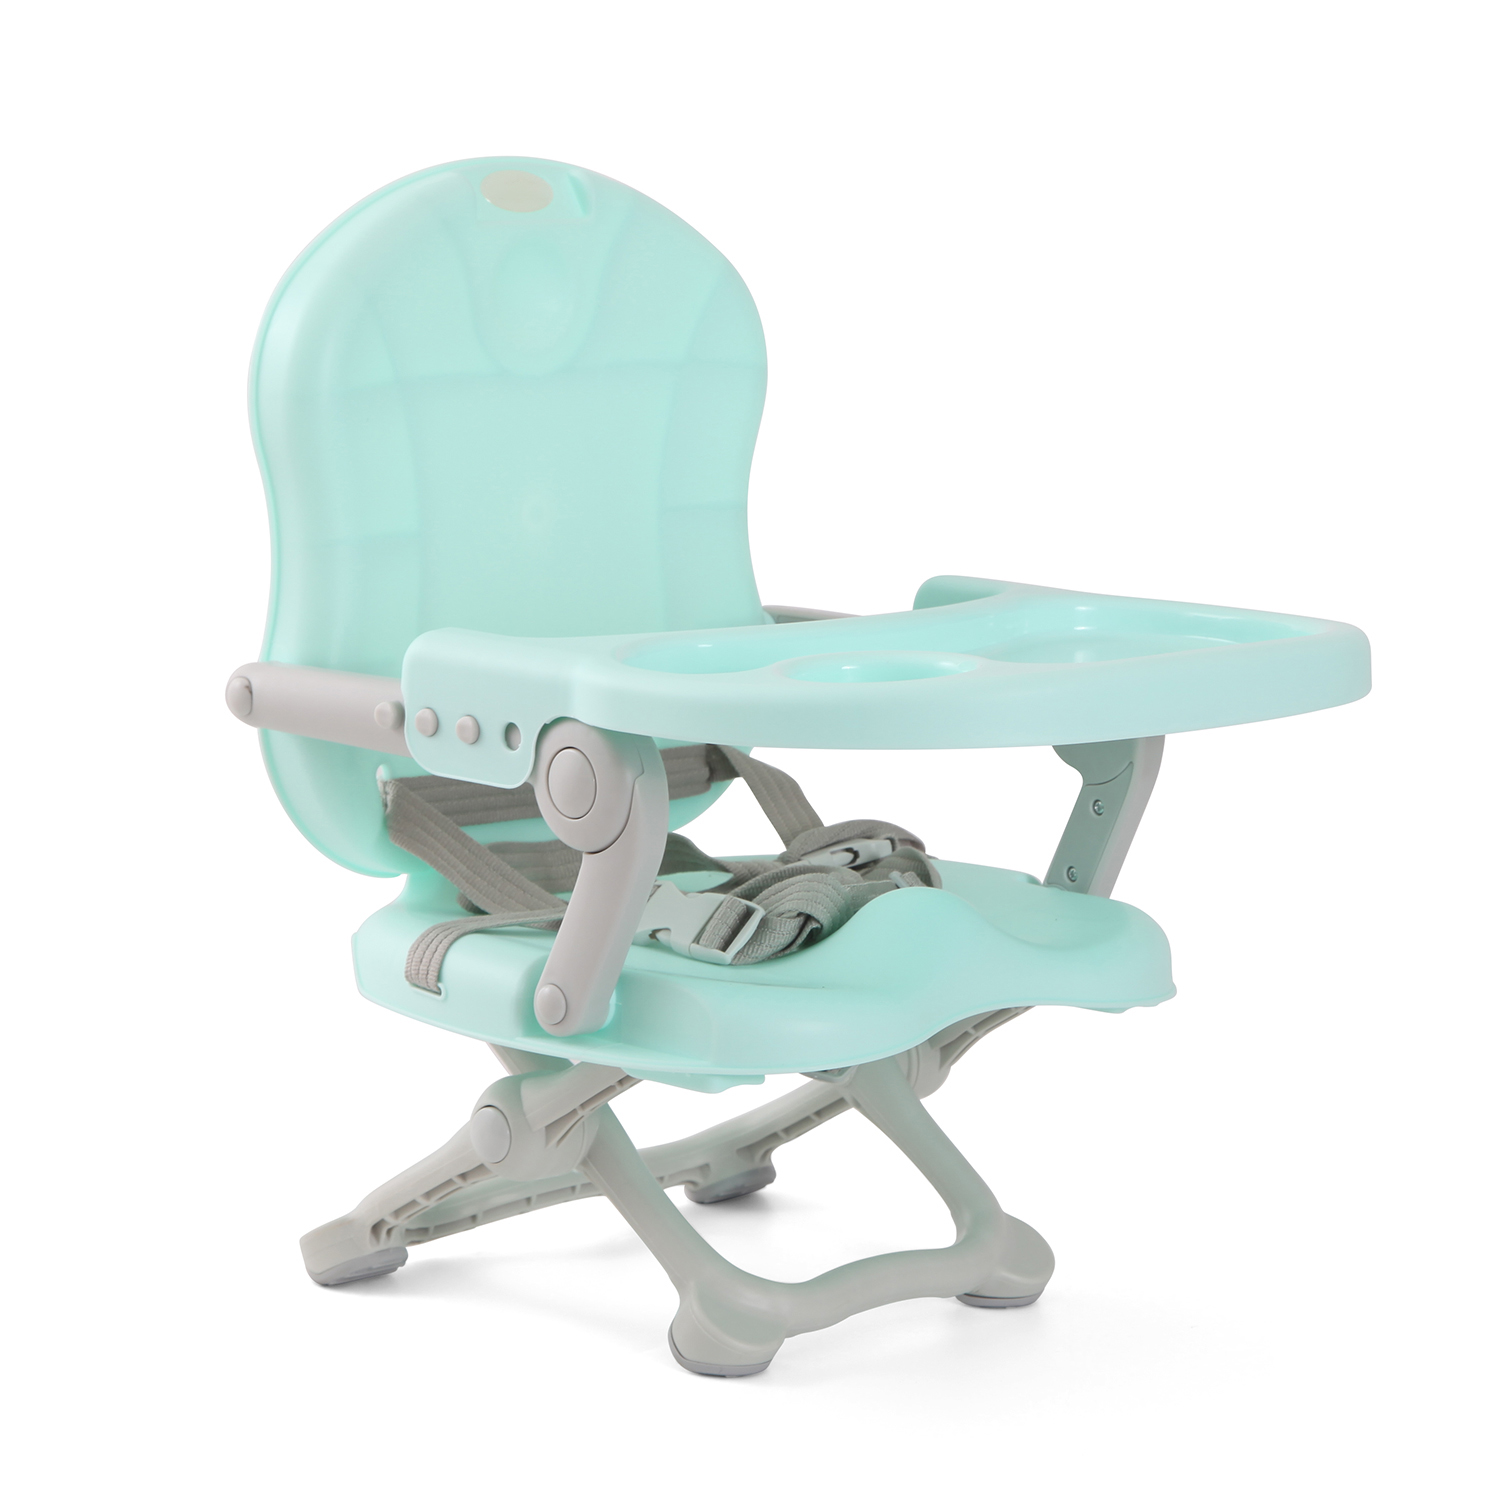 Baby Travel Dining Chair - Green,Baby Travel Dining Chair - Green